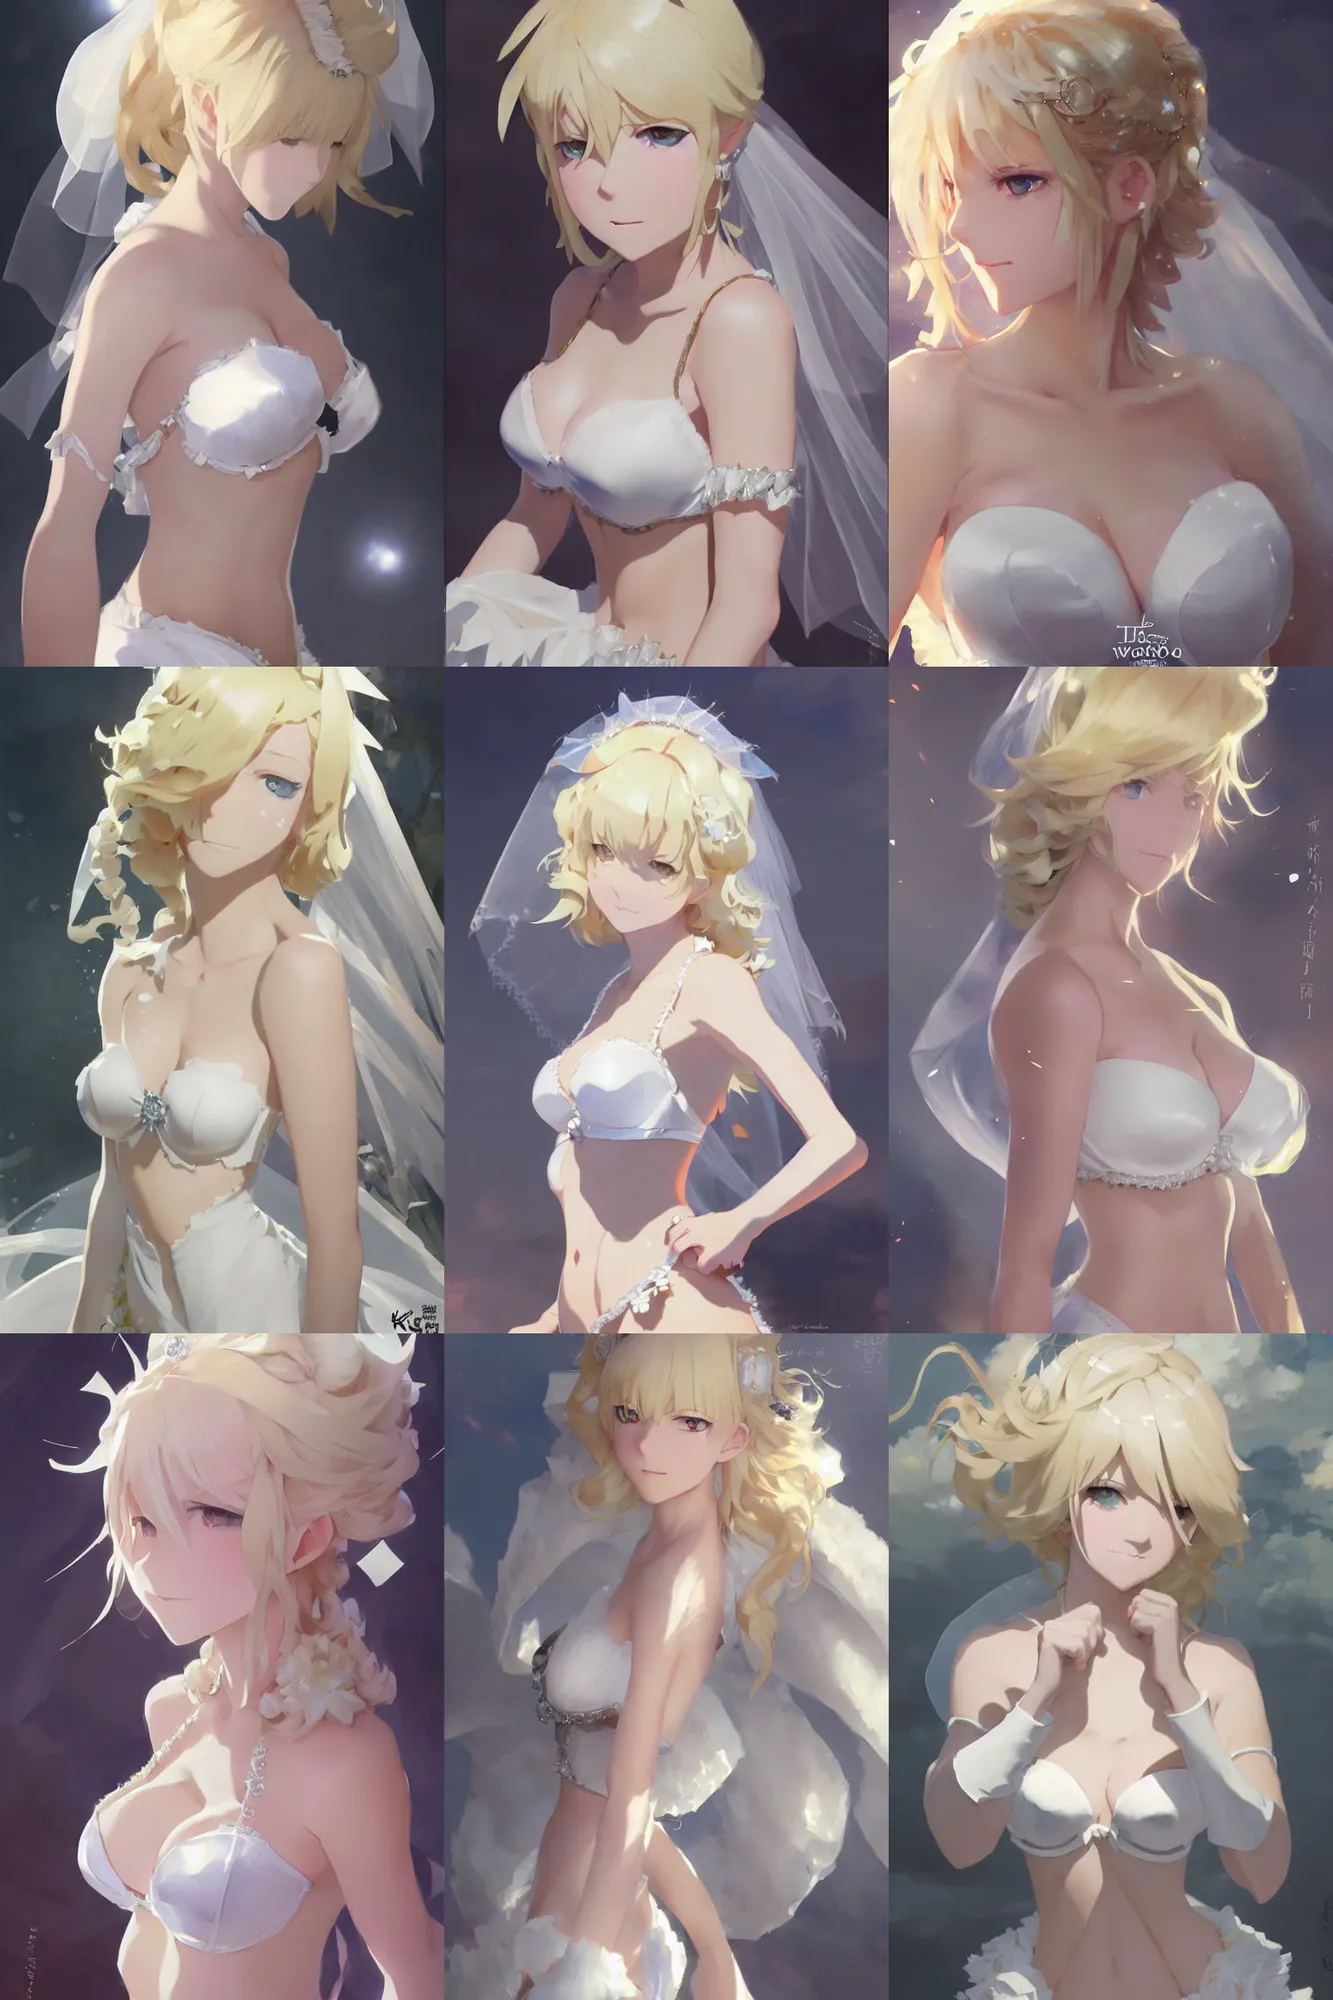 Prompt: Worksafe. Cinematic, epic. Close-up blonde princess wearing white bridal bra with many frills and diamonds, by krenz cushart, makoto shinkai and pixiv. Accurately shaped. A very clean image. High contrast and gentle colors.